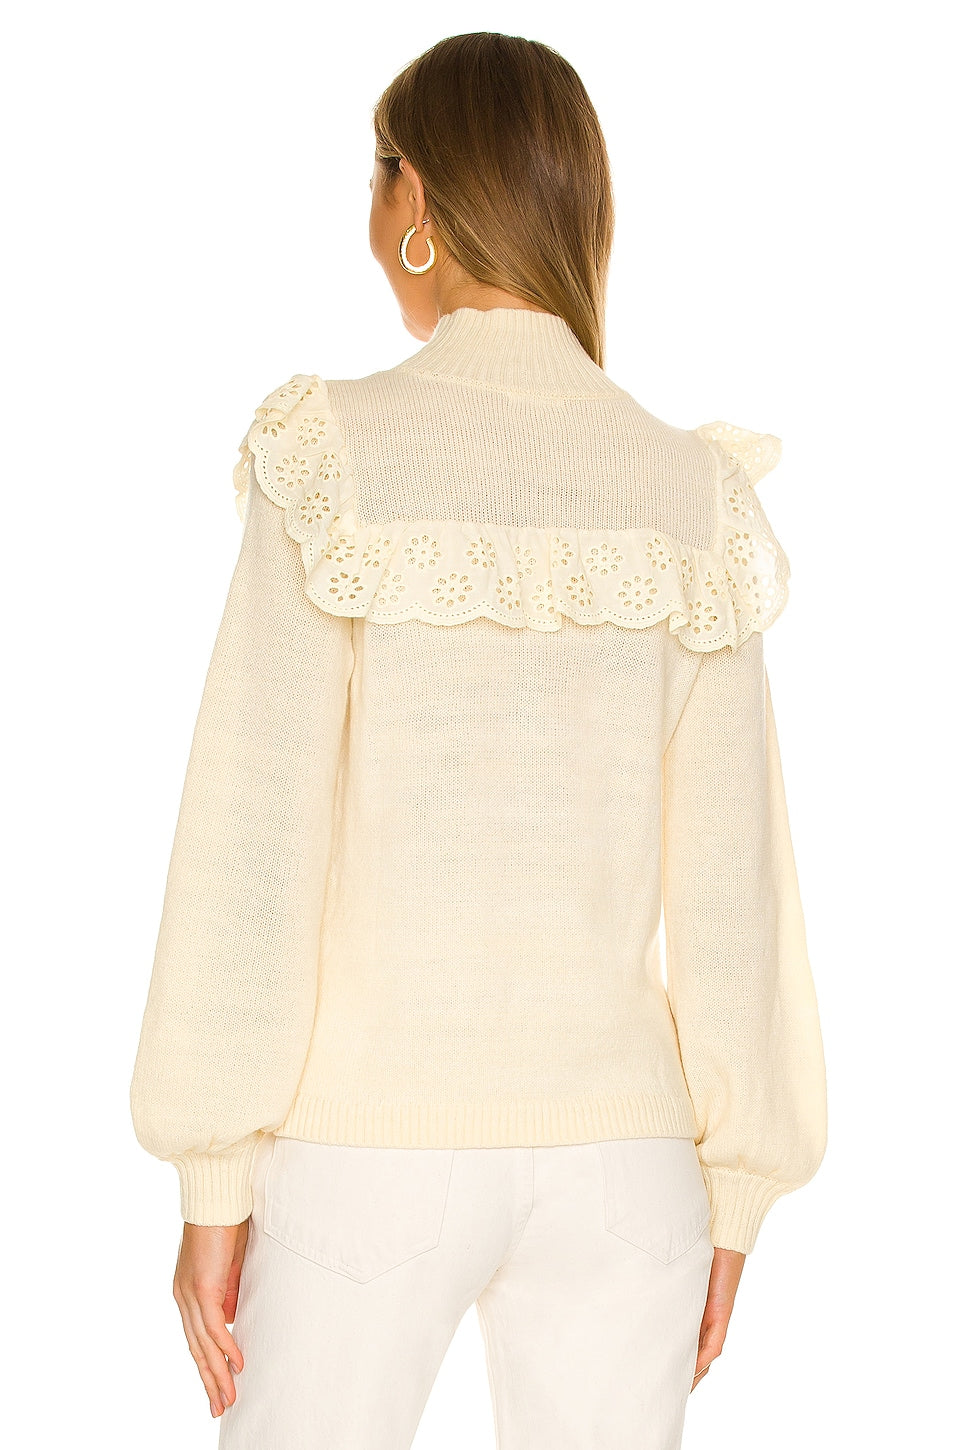 Marti Sweater in IVORY